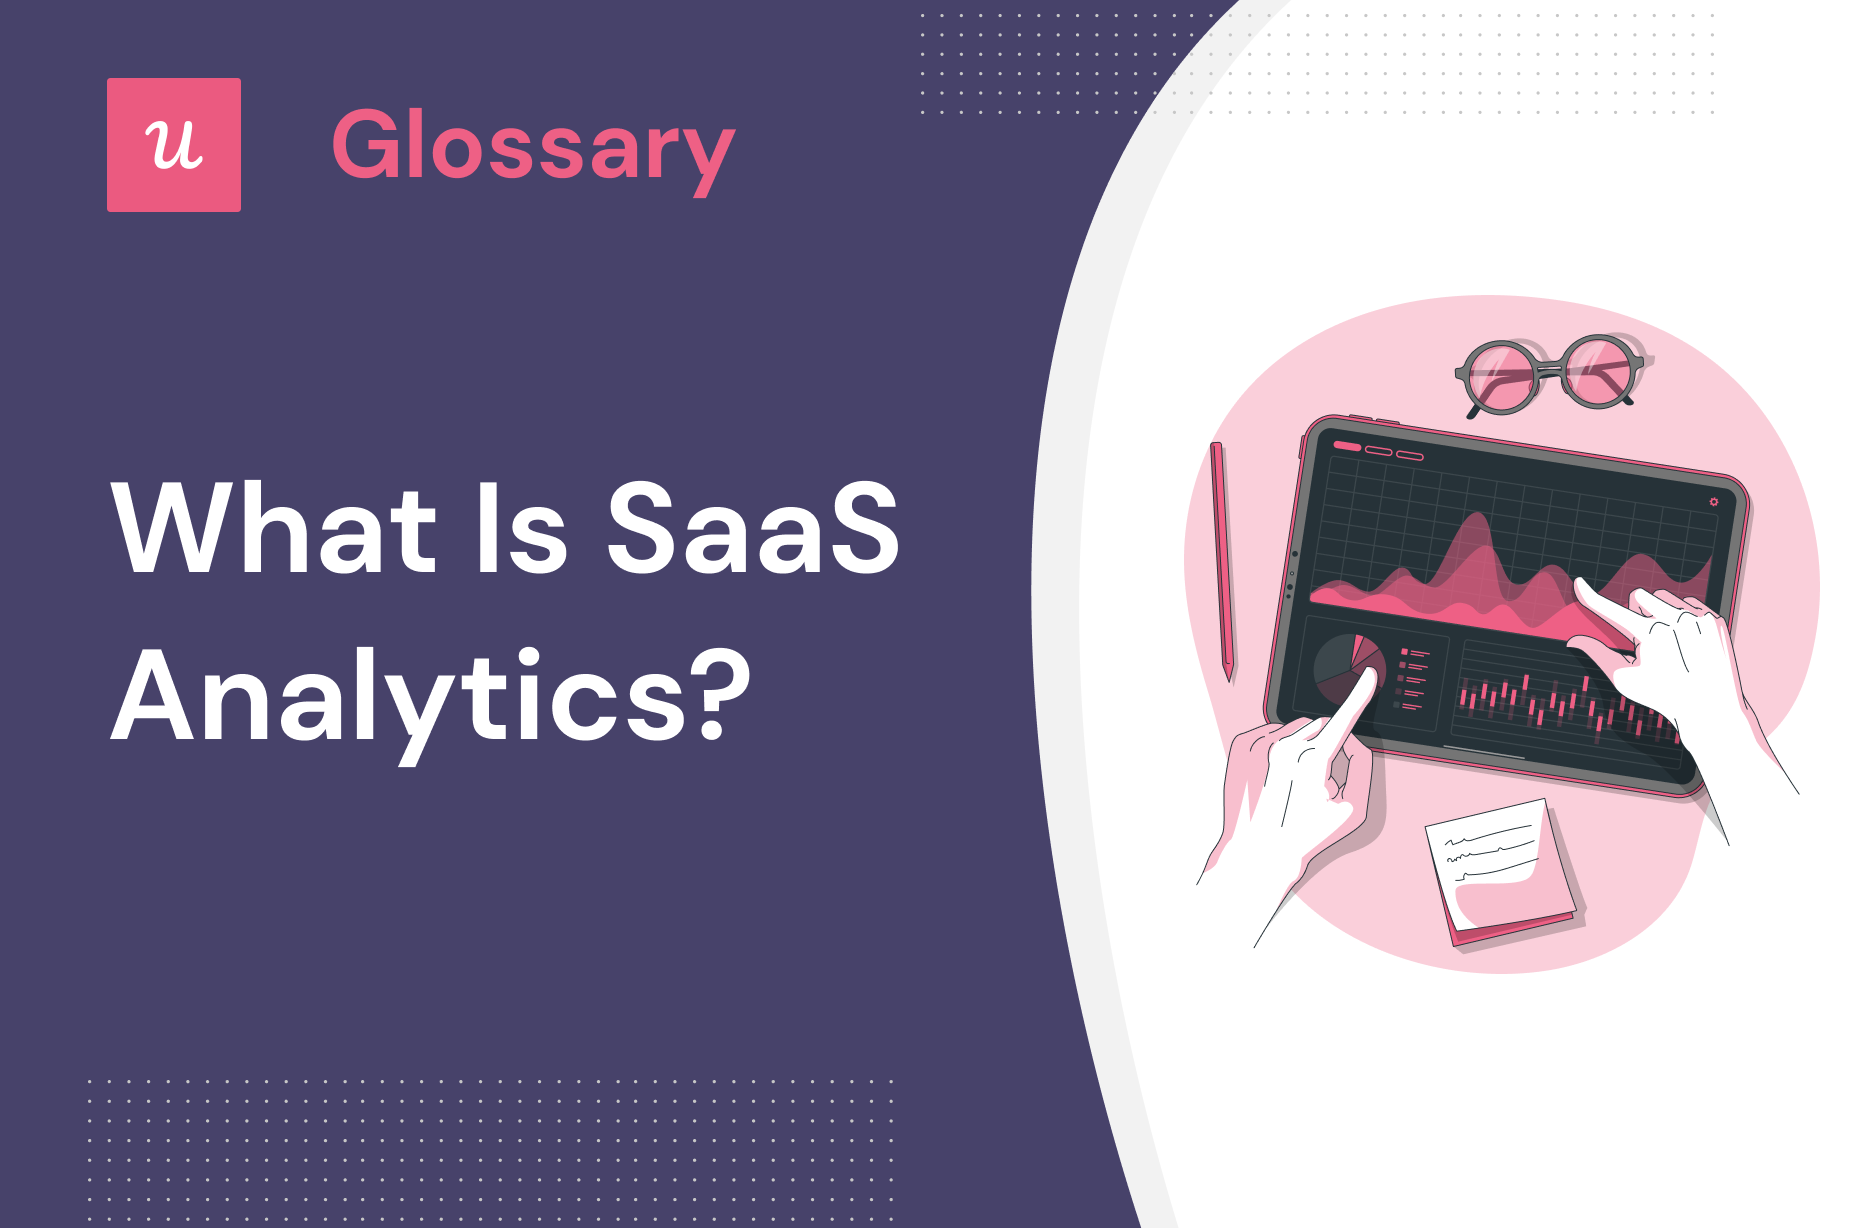 What is SaaS Analytics?